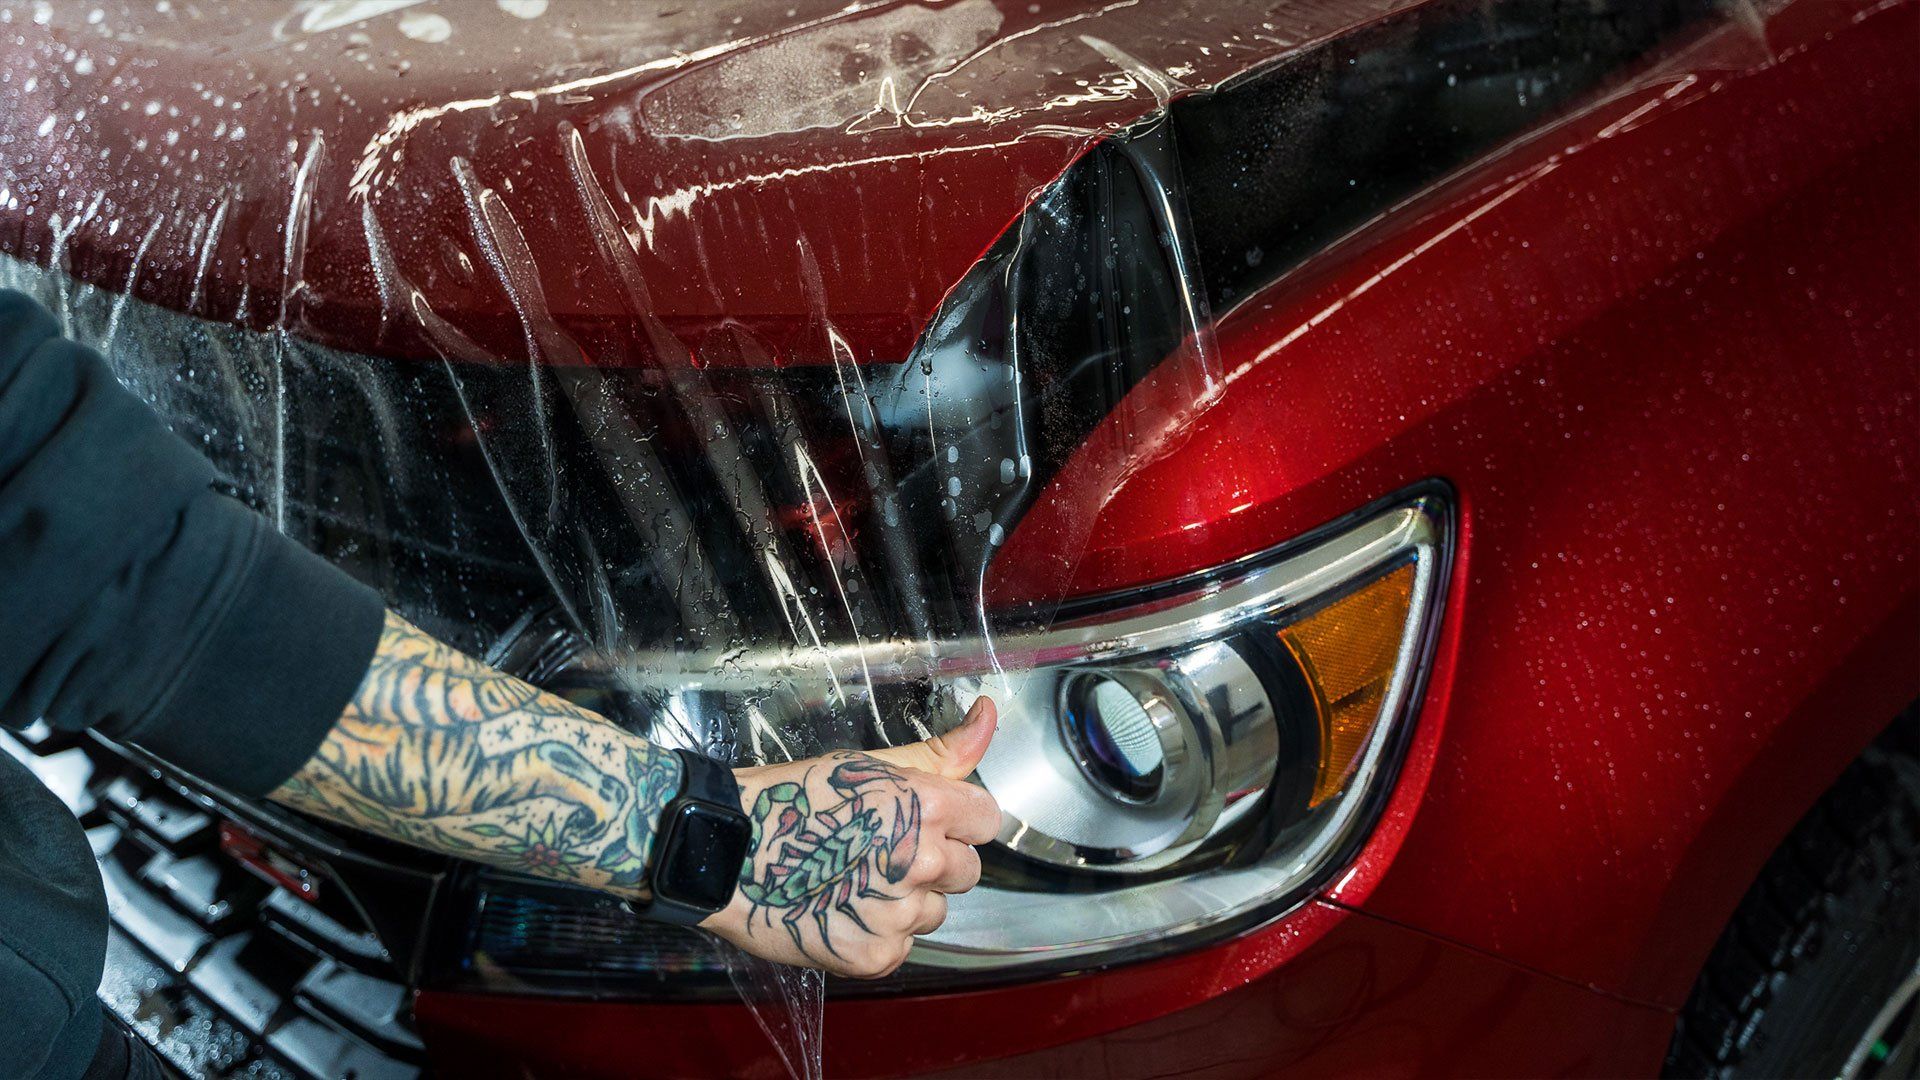 A man with tattoos is covering the hood of a red car with plastic.